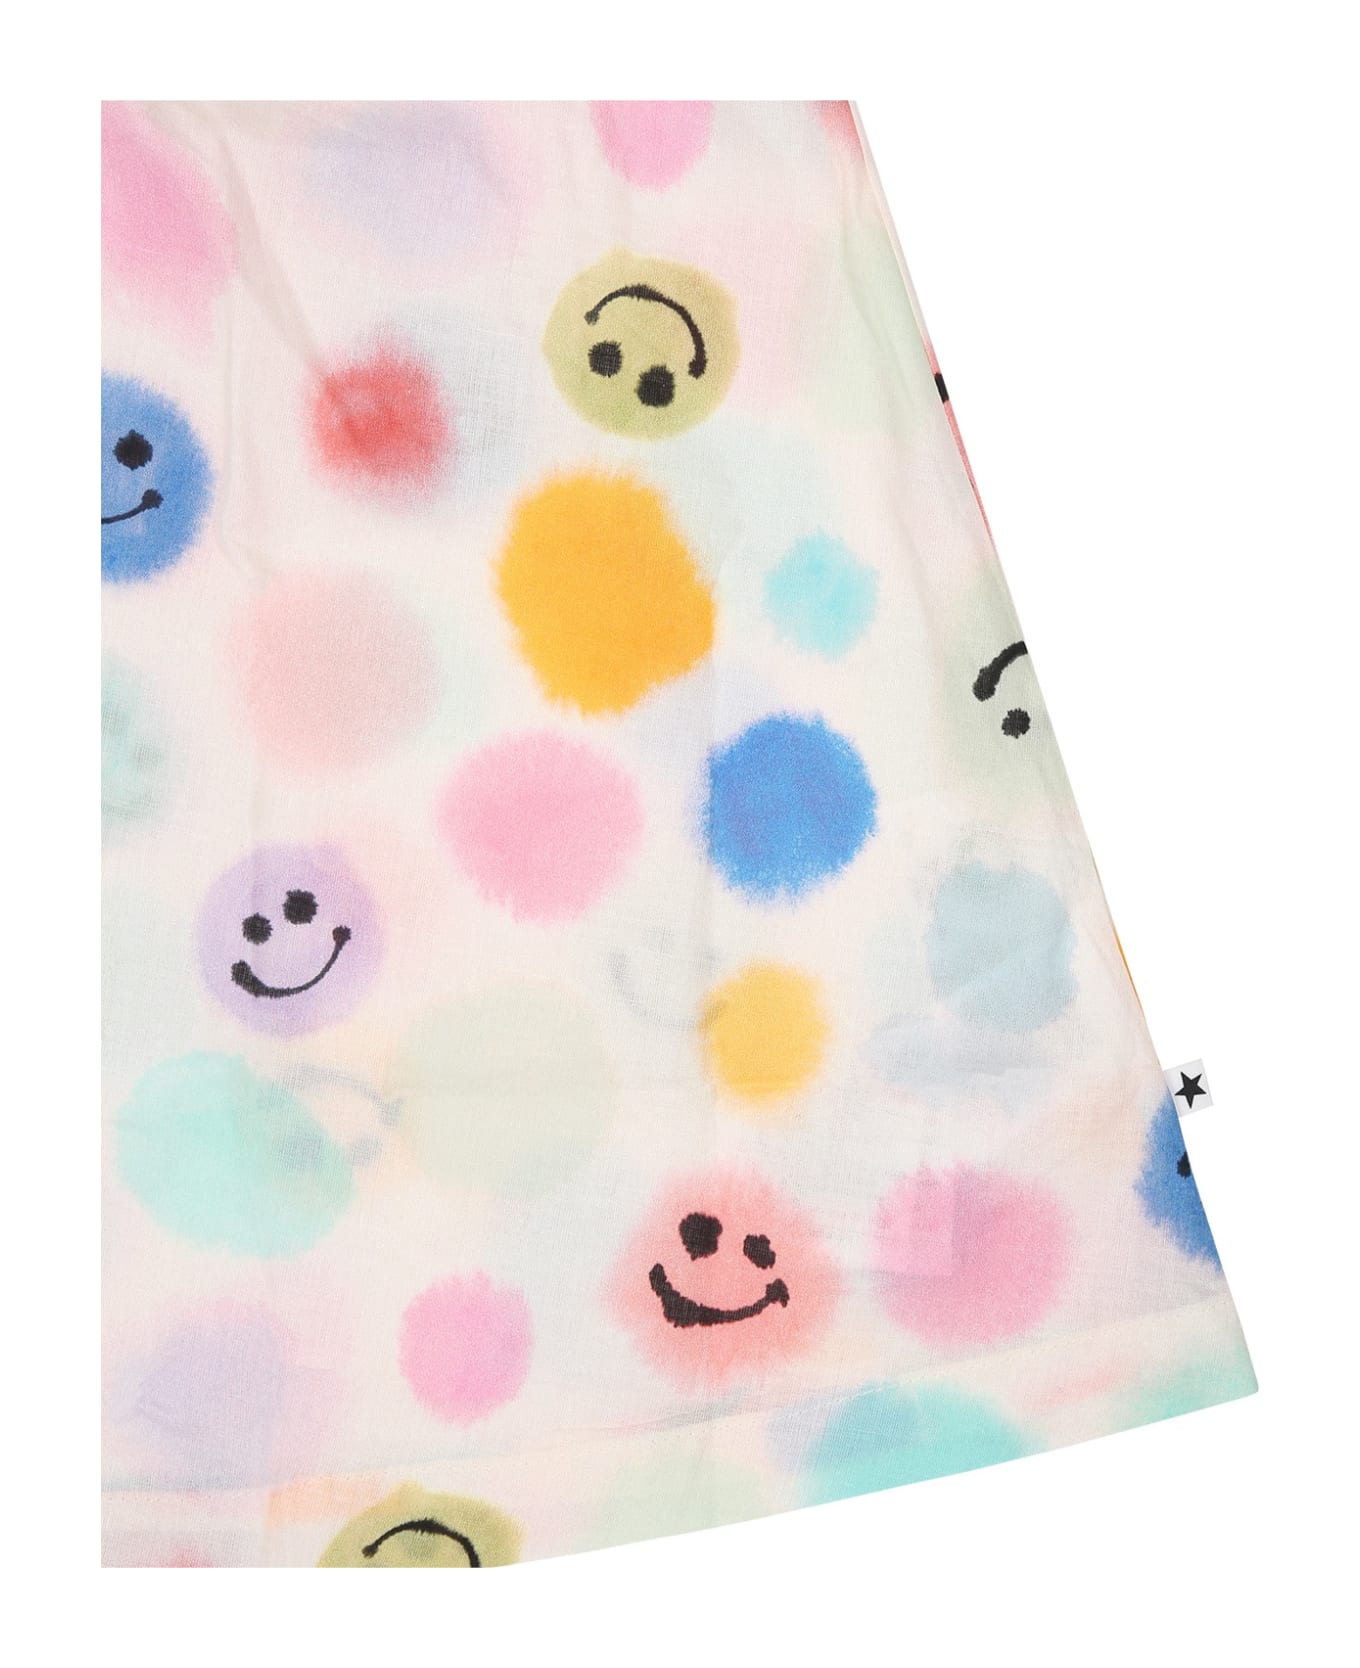 Molo Ivory Beach Cover-up For Girl With Smiley And Polka Dots - Multicolor ワンピース＆ドレス